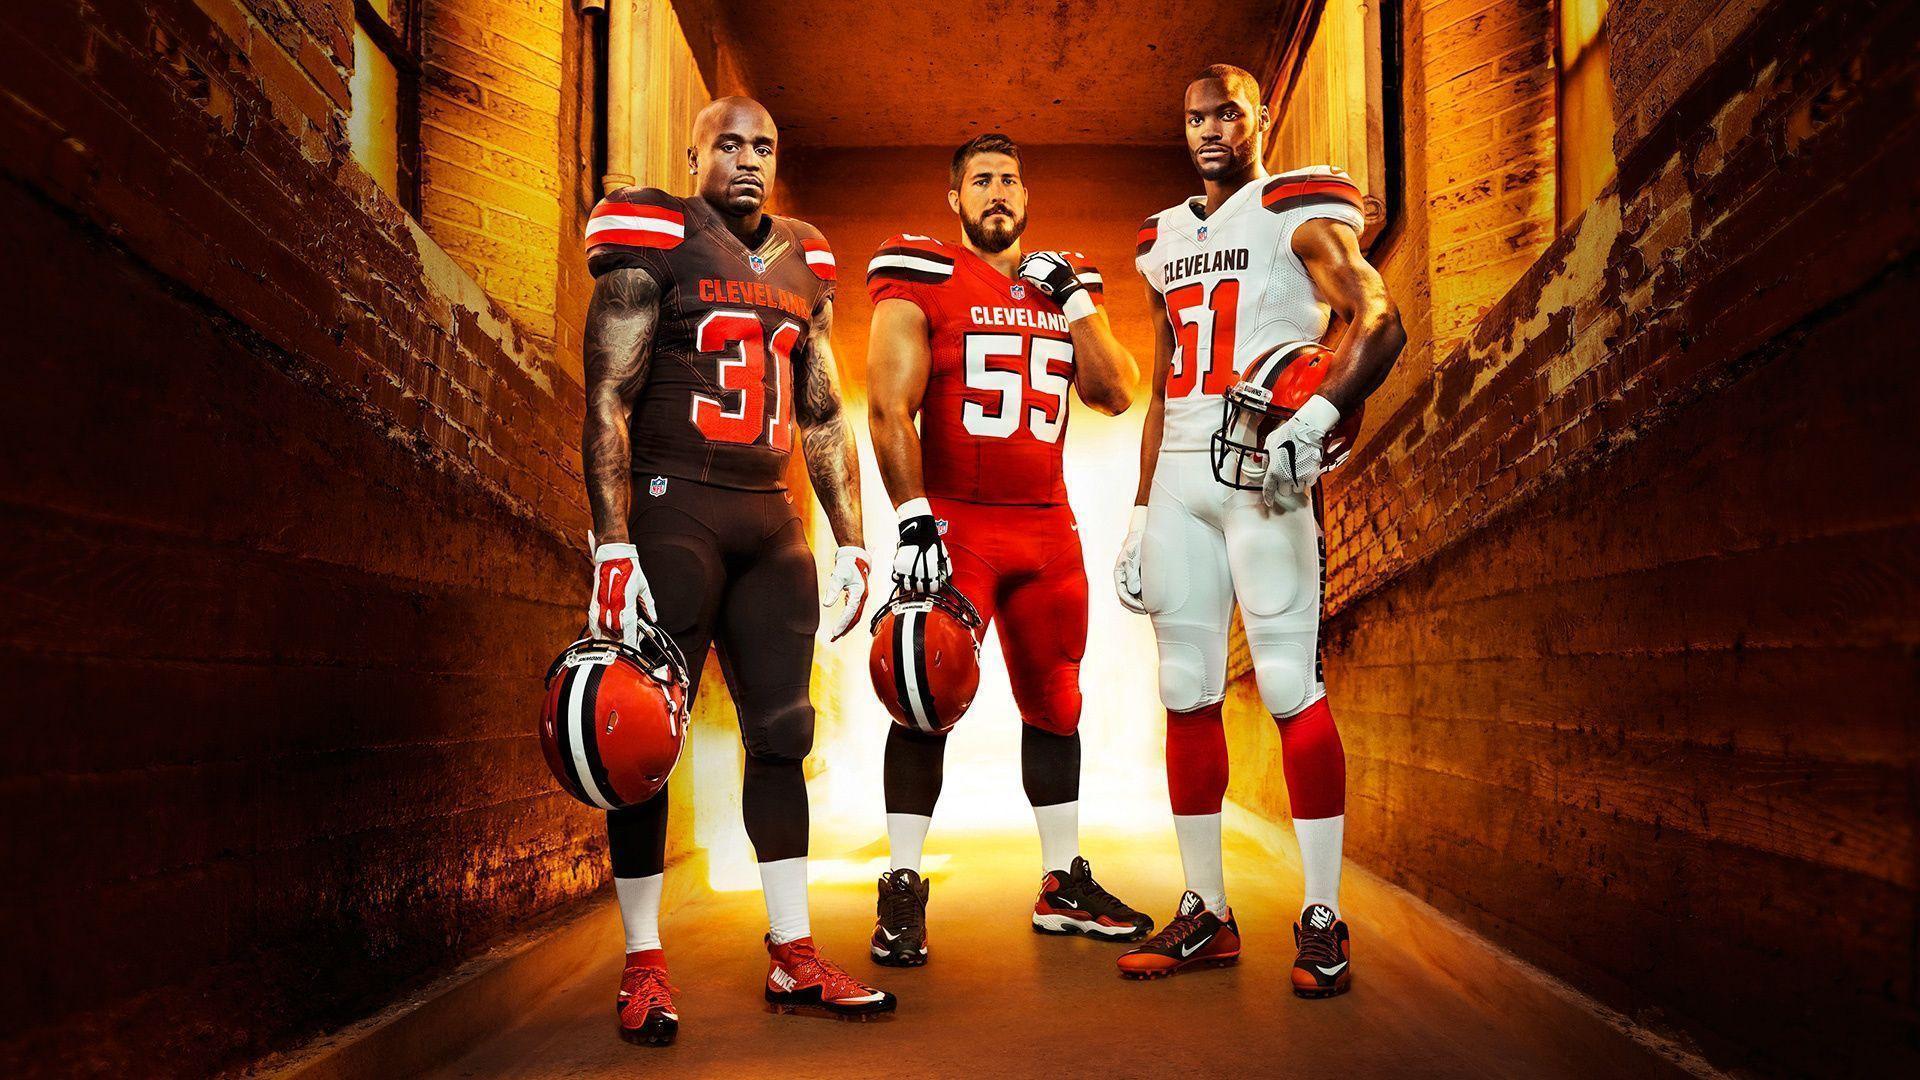 American Football, Team Players, Art, Cleveland Browns